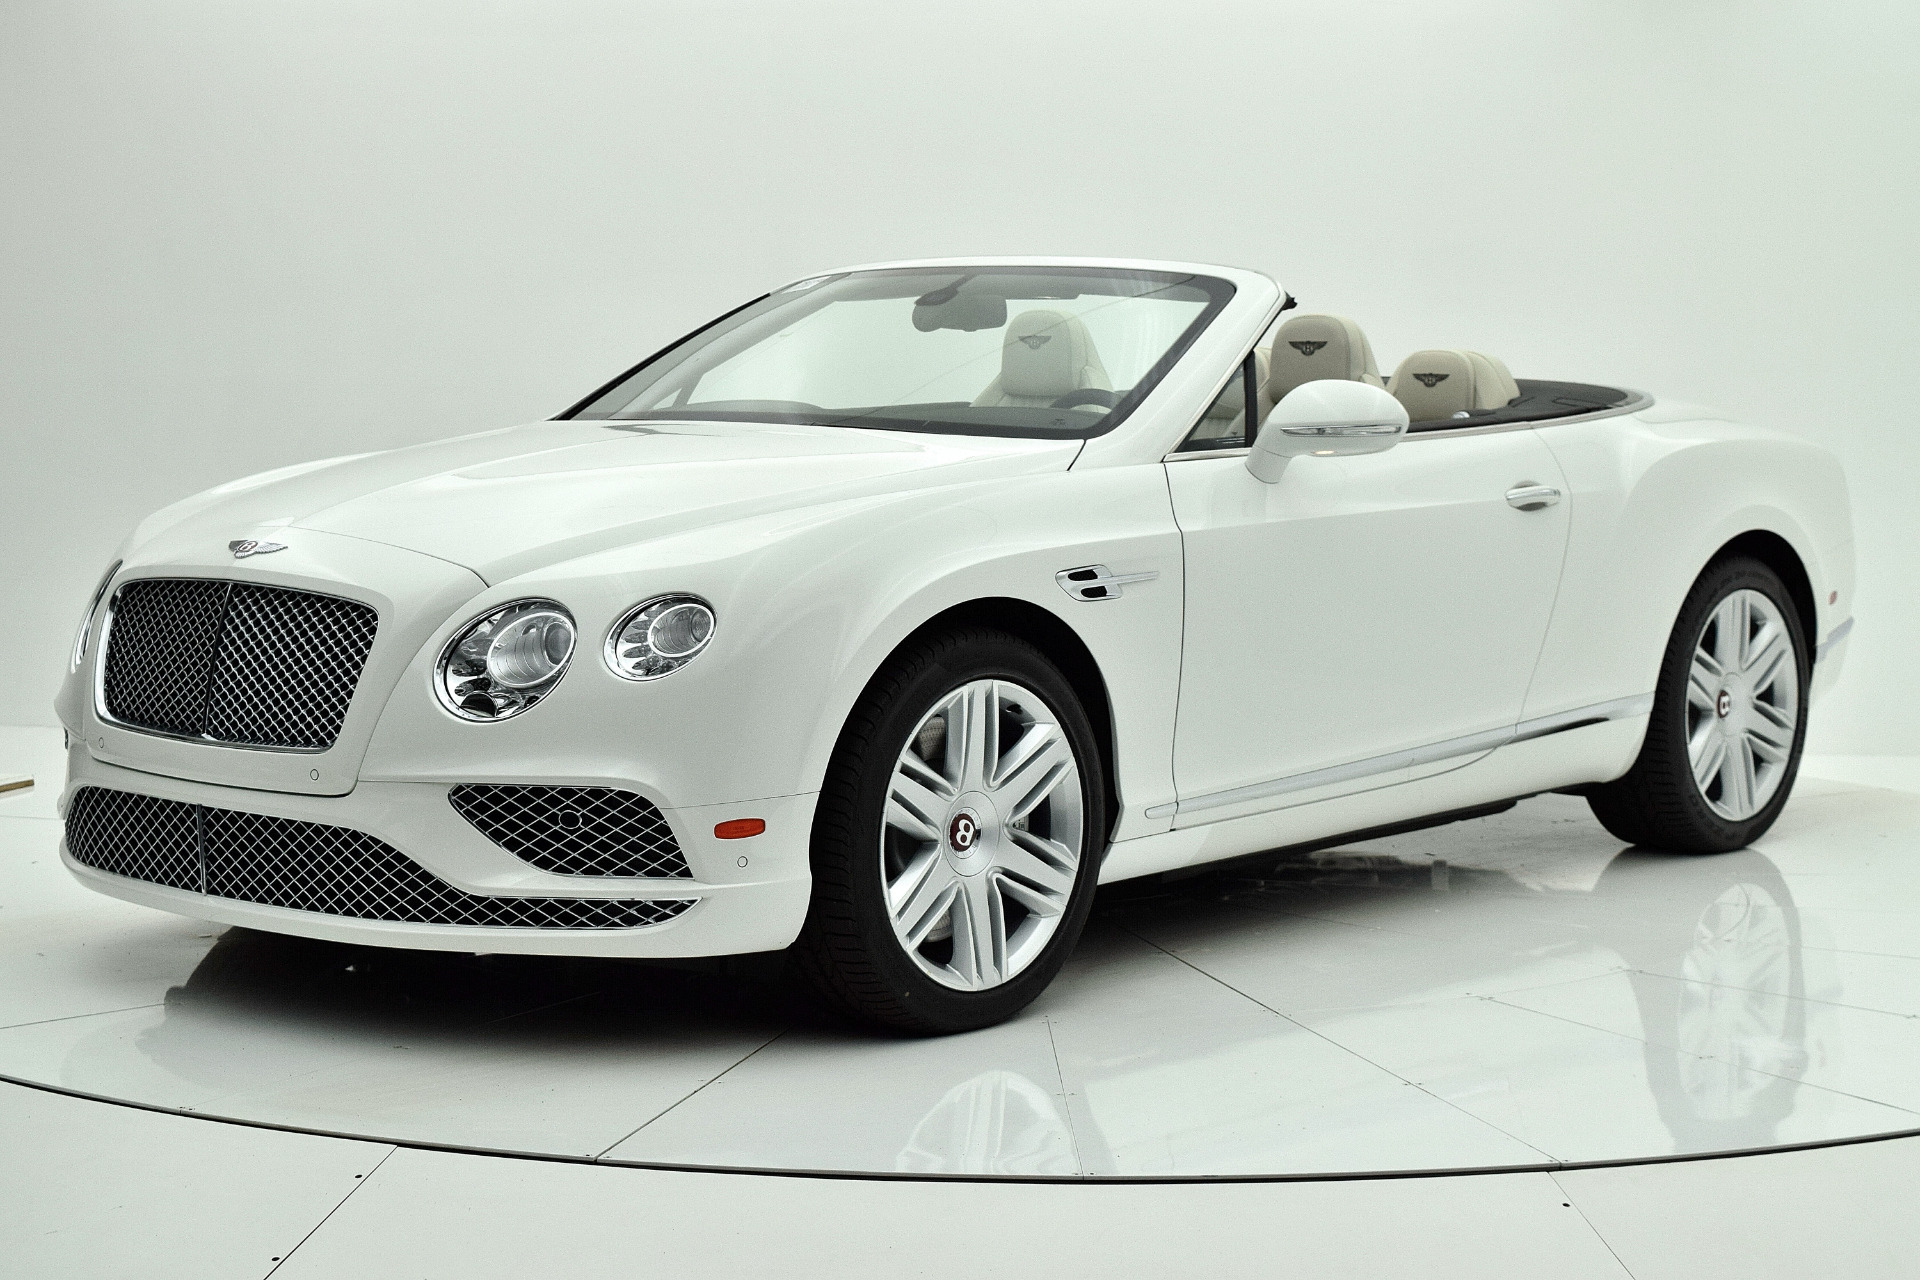 Used 2017 Bentley Continental GT V8 Convertible for sale Sold at Bentley Palmyra N.J. in Palmyra NJ 08065 2